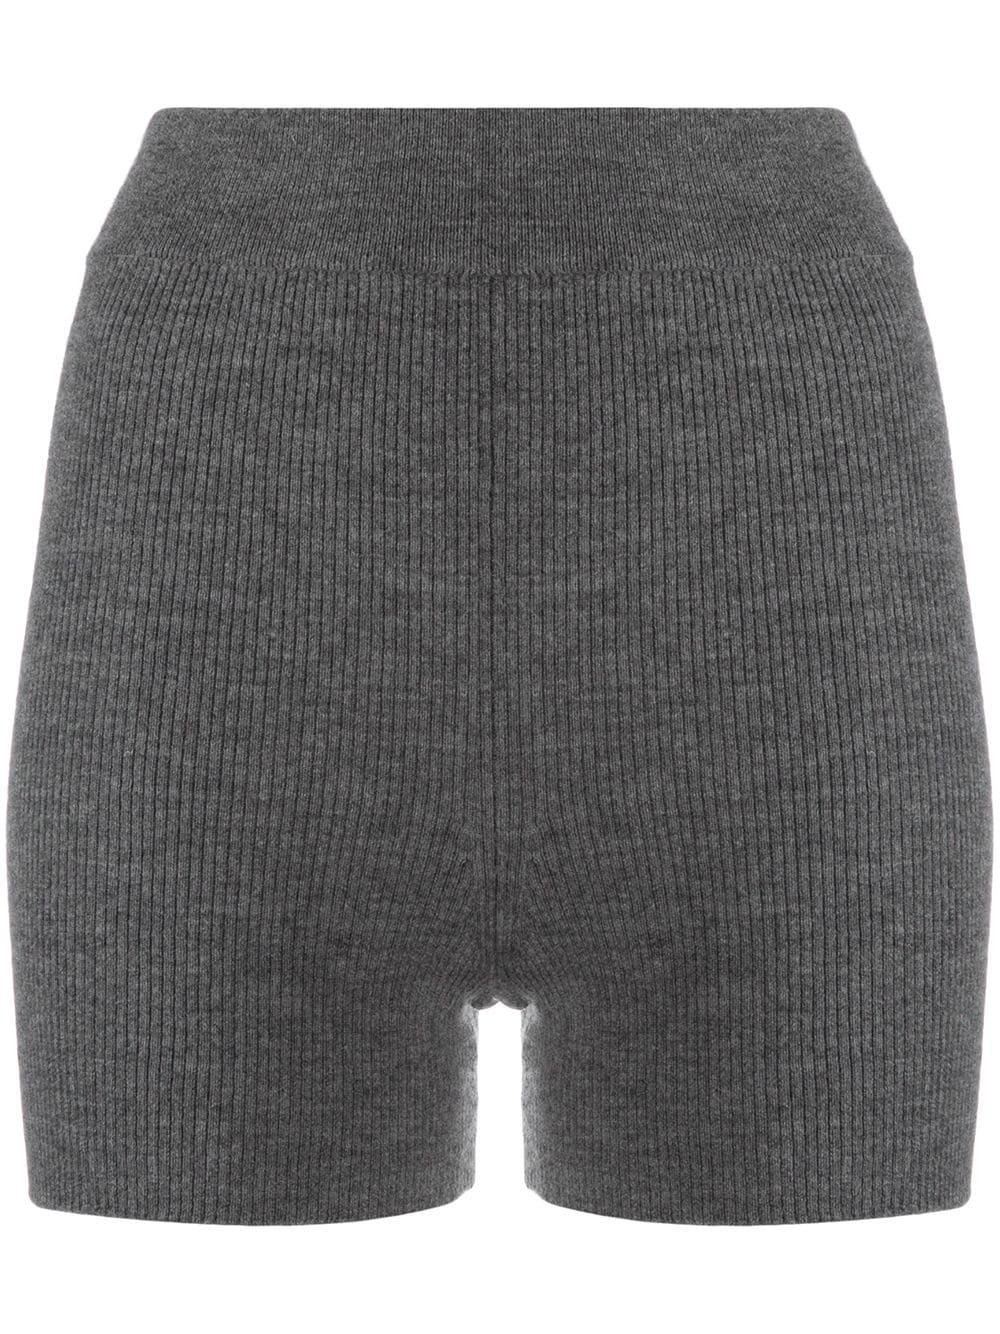 Alexa ribbed-knit biker shorts by CASHMERE IN LOVE